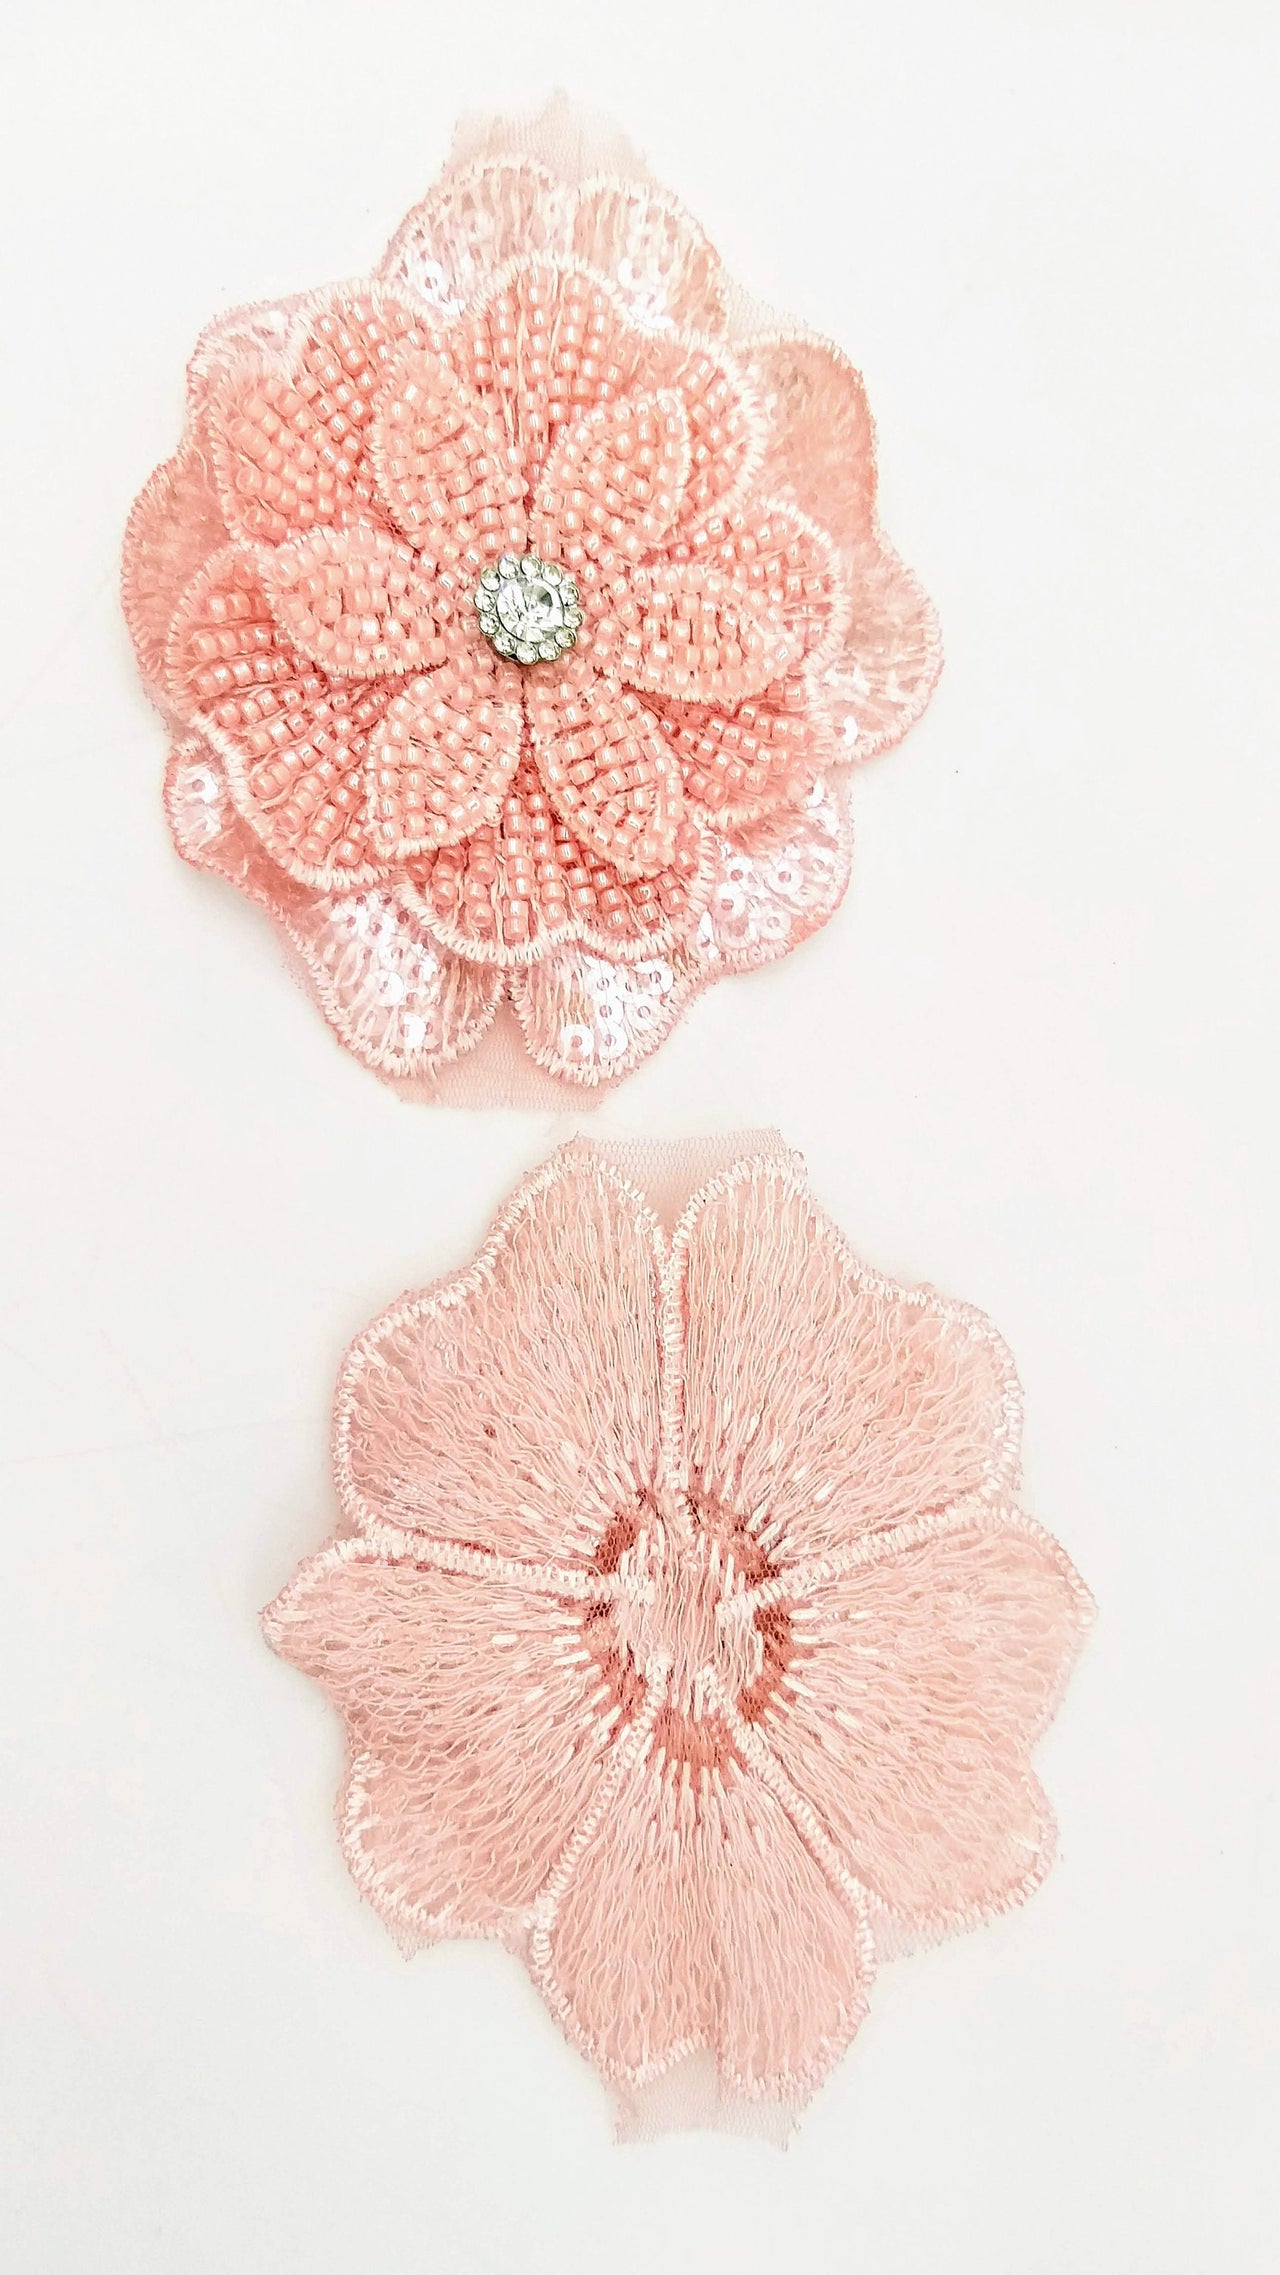 Pink Hand Embroidered Floral Applique With Beads, Crochet Cut Dana Applique, Beaded Flower Motifs